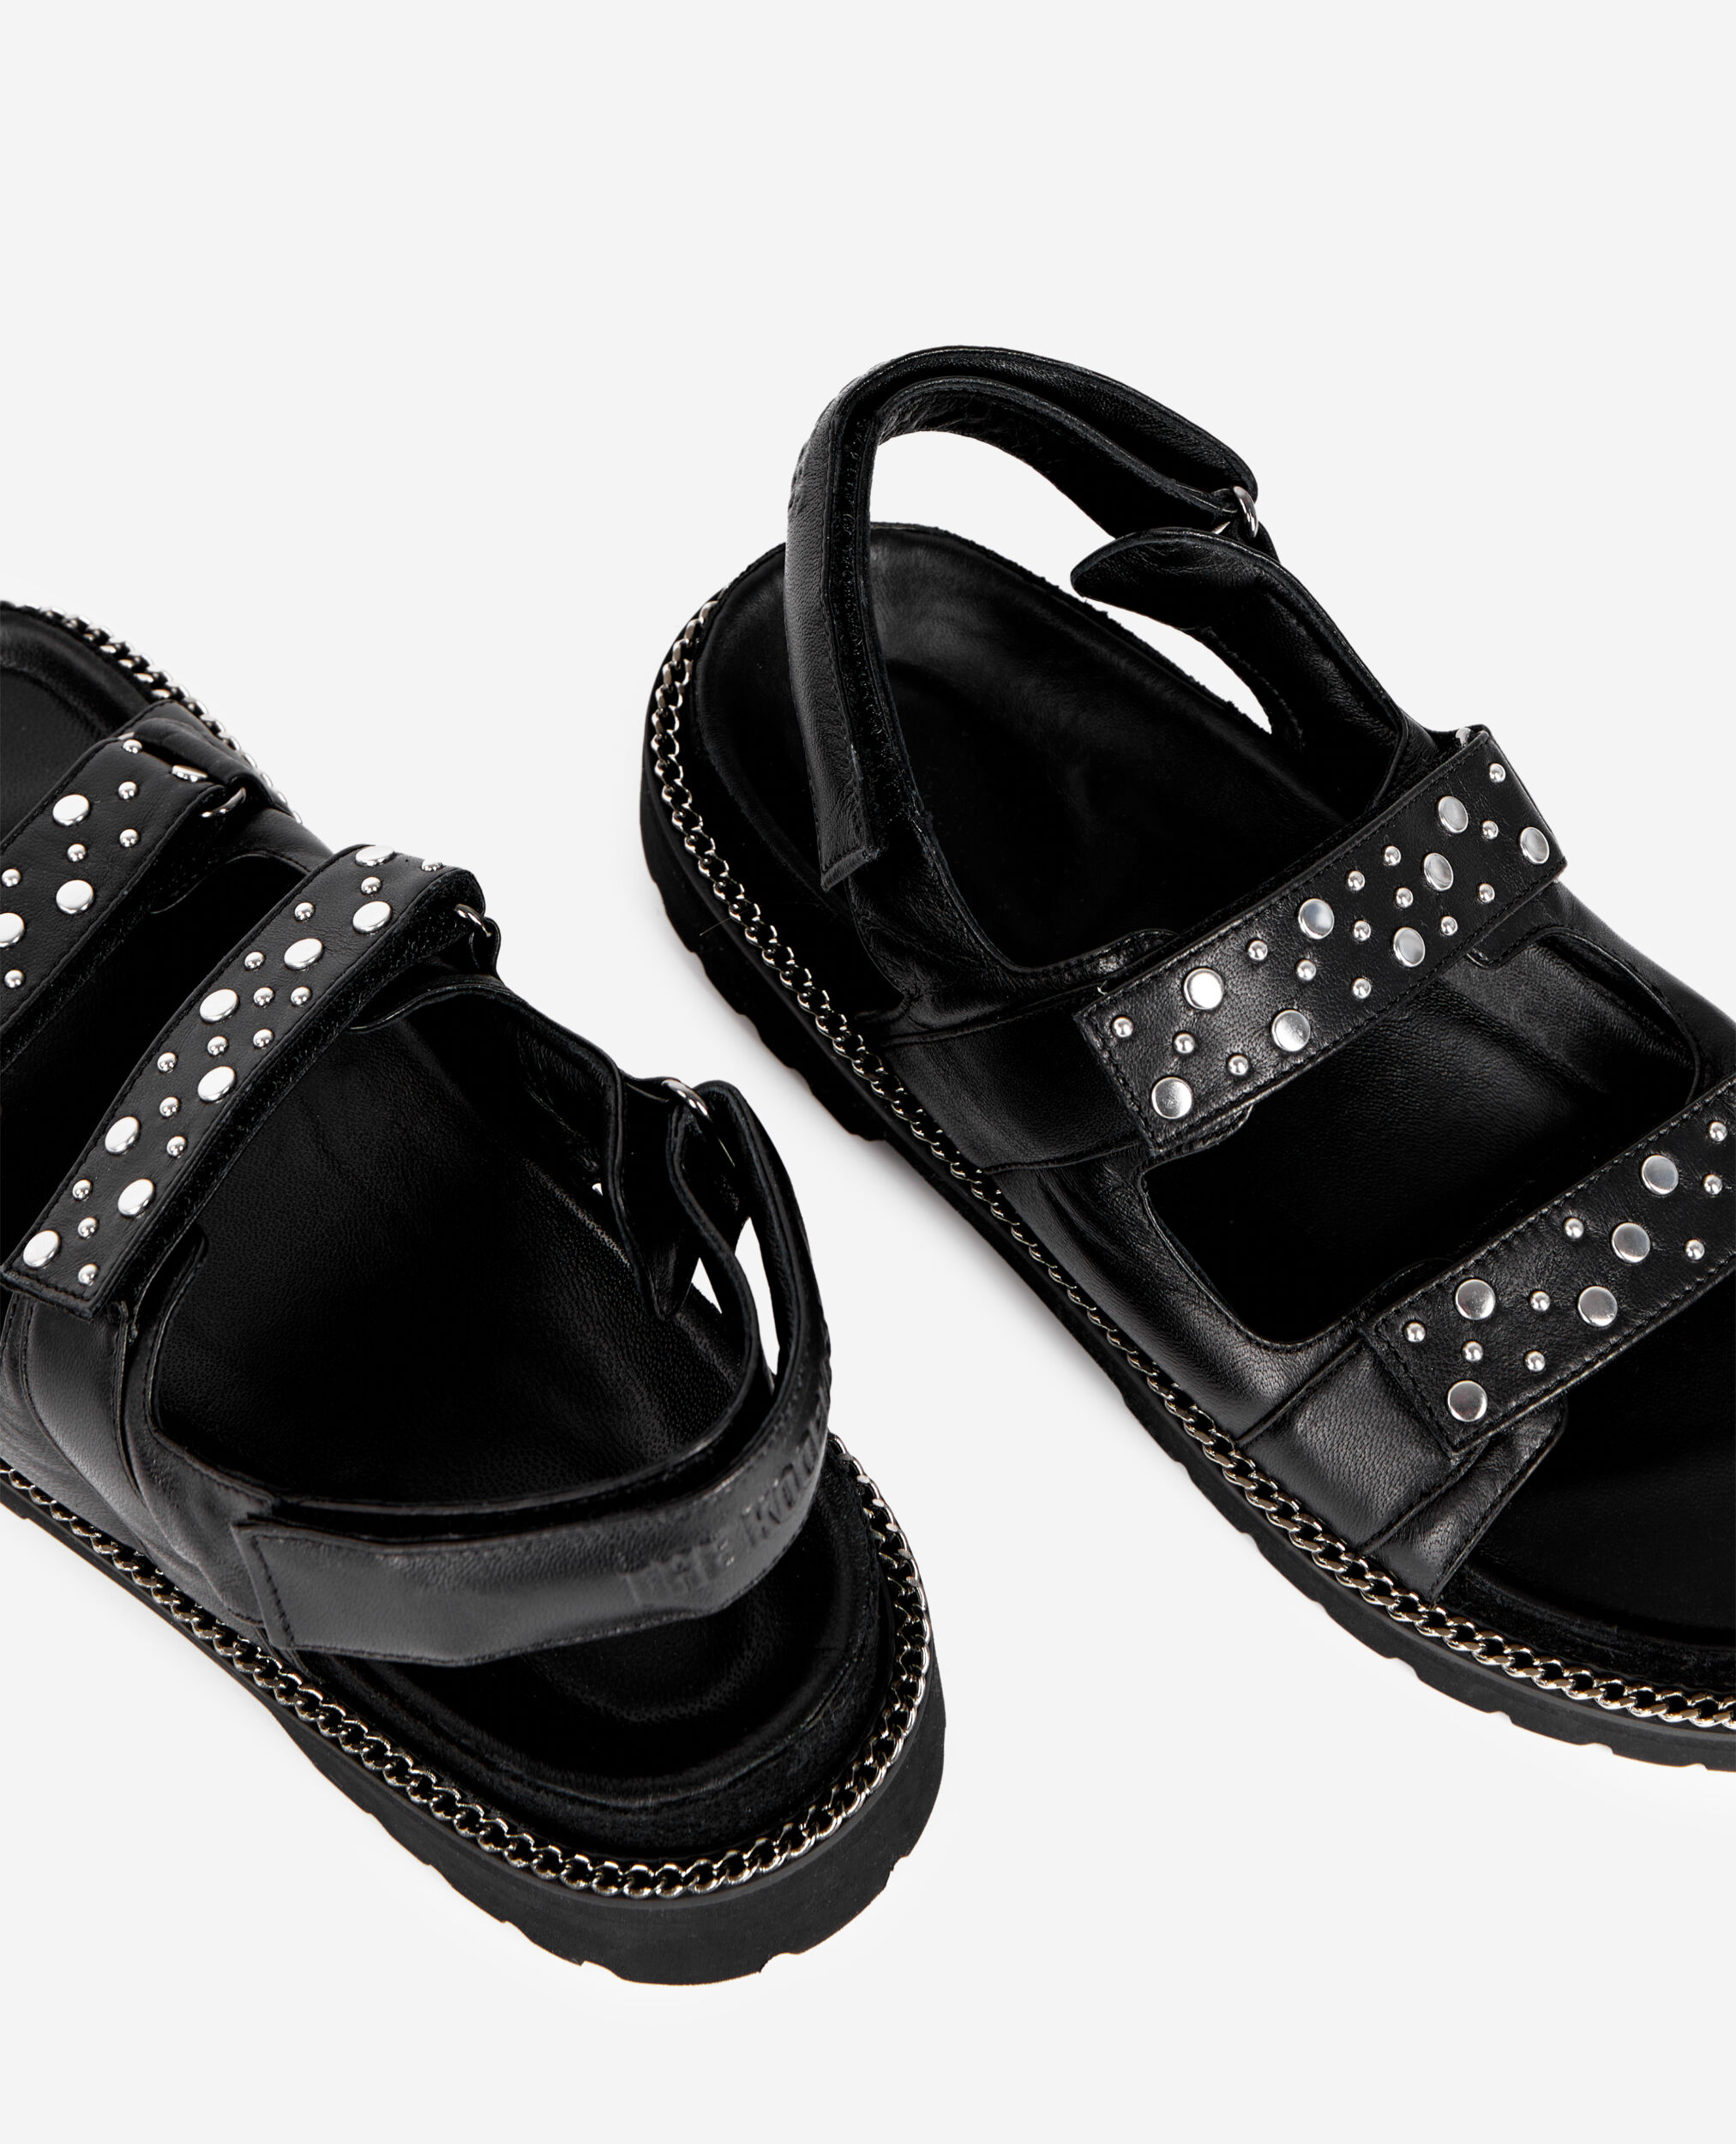 Black leather flat sandals with chain and studs, BLACK, hi-res image number null